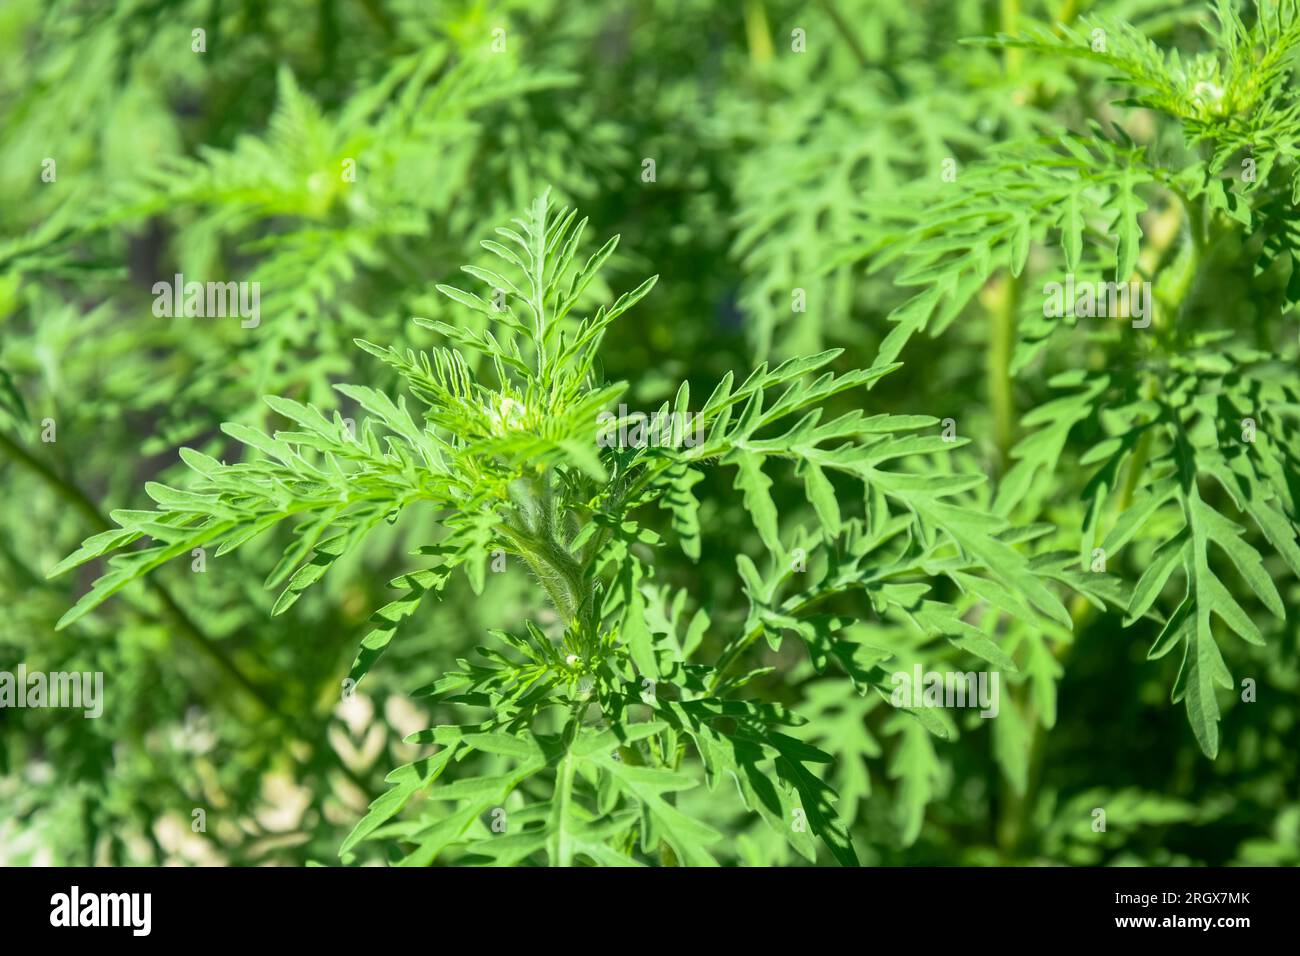 American common ragweed, full frame. Dangerous plant. Ambrosia shrubs that causes allergic reactions, allergic rhinitis. Close-up. Selective focus. Stock Photo